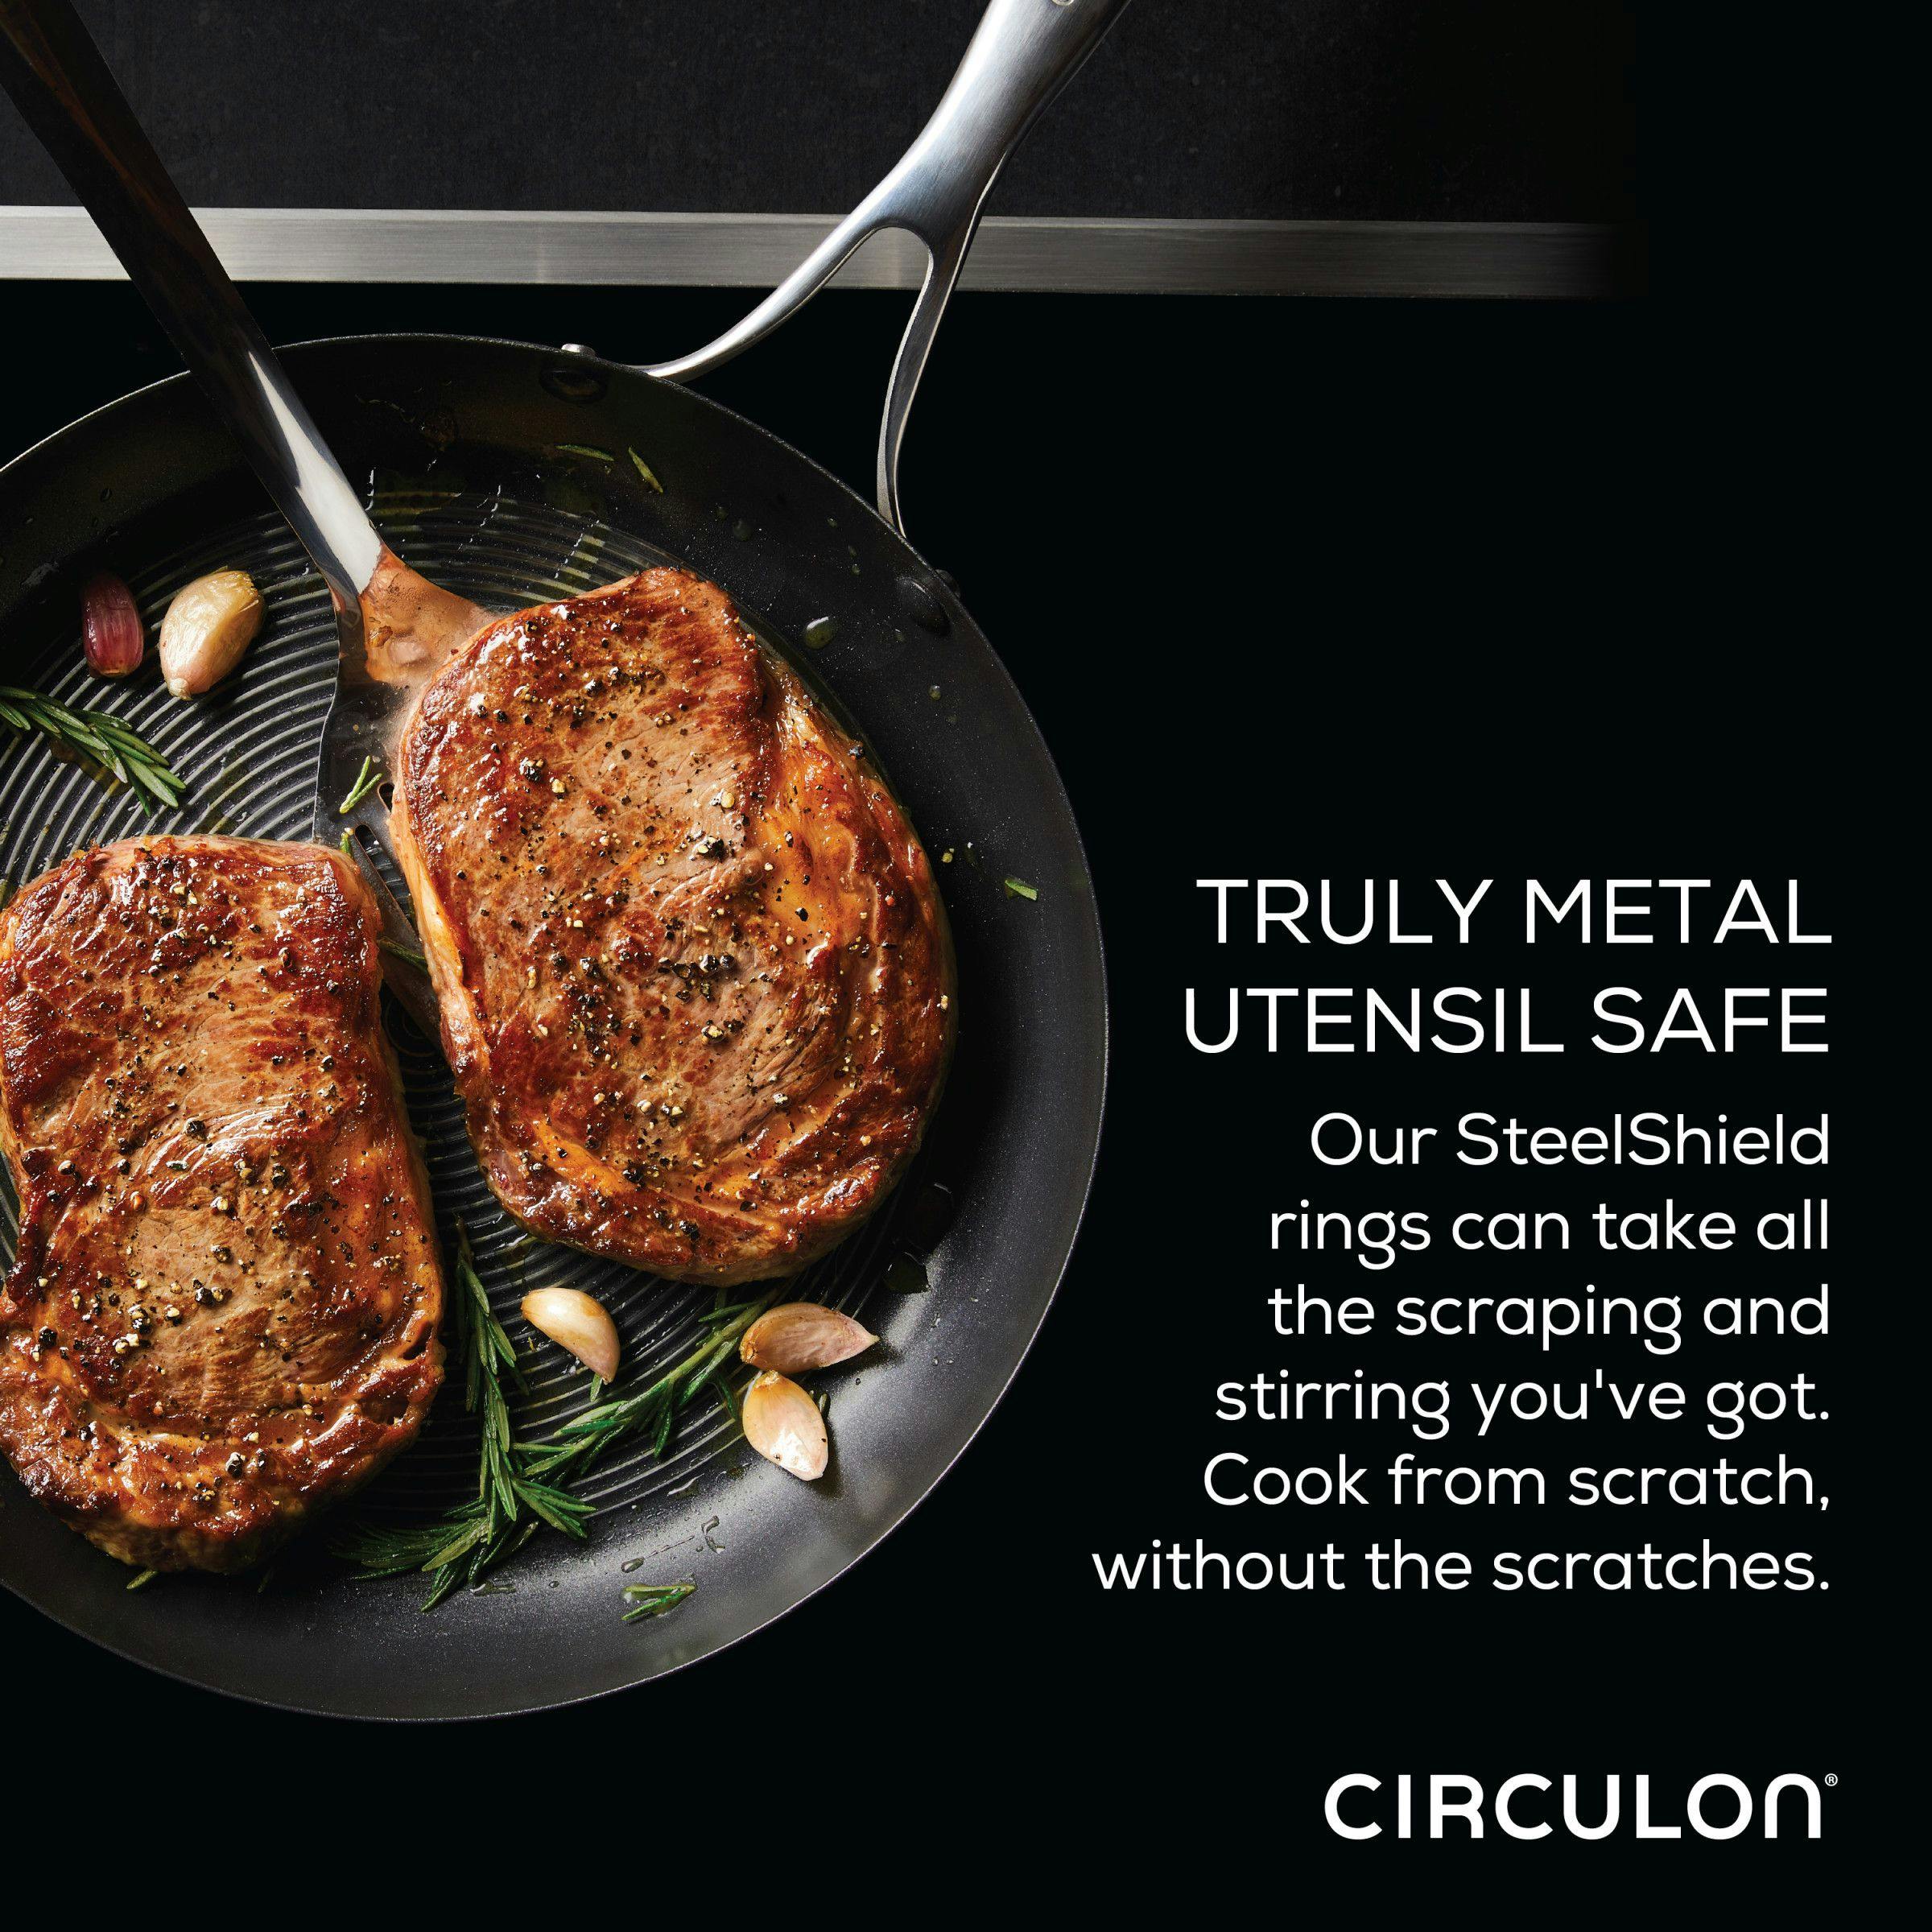 Circulon Stainless Steel Induction Frying Pan with Lid and SteelShield Hybrid Stainless and Nonstick Technology, 12-Inch, Silver